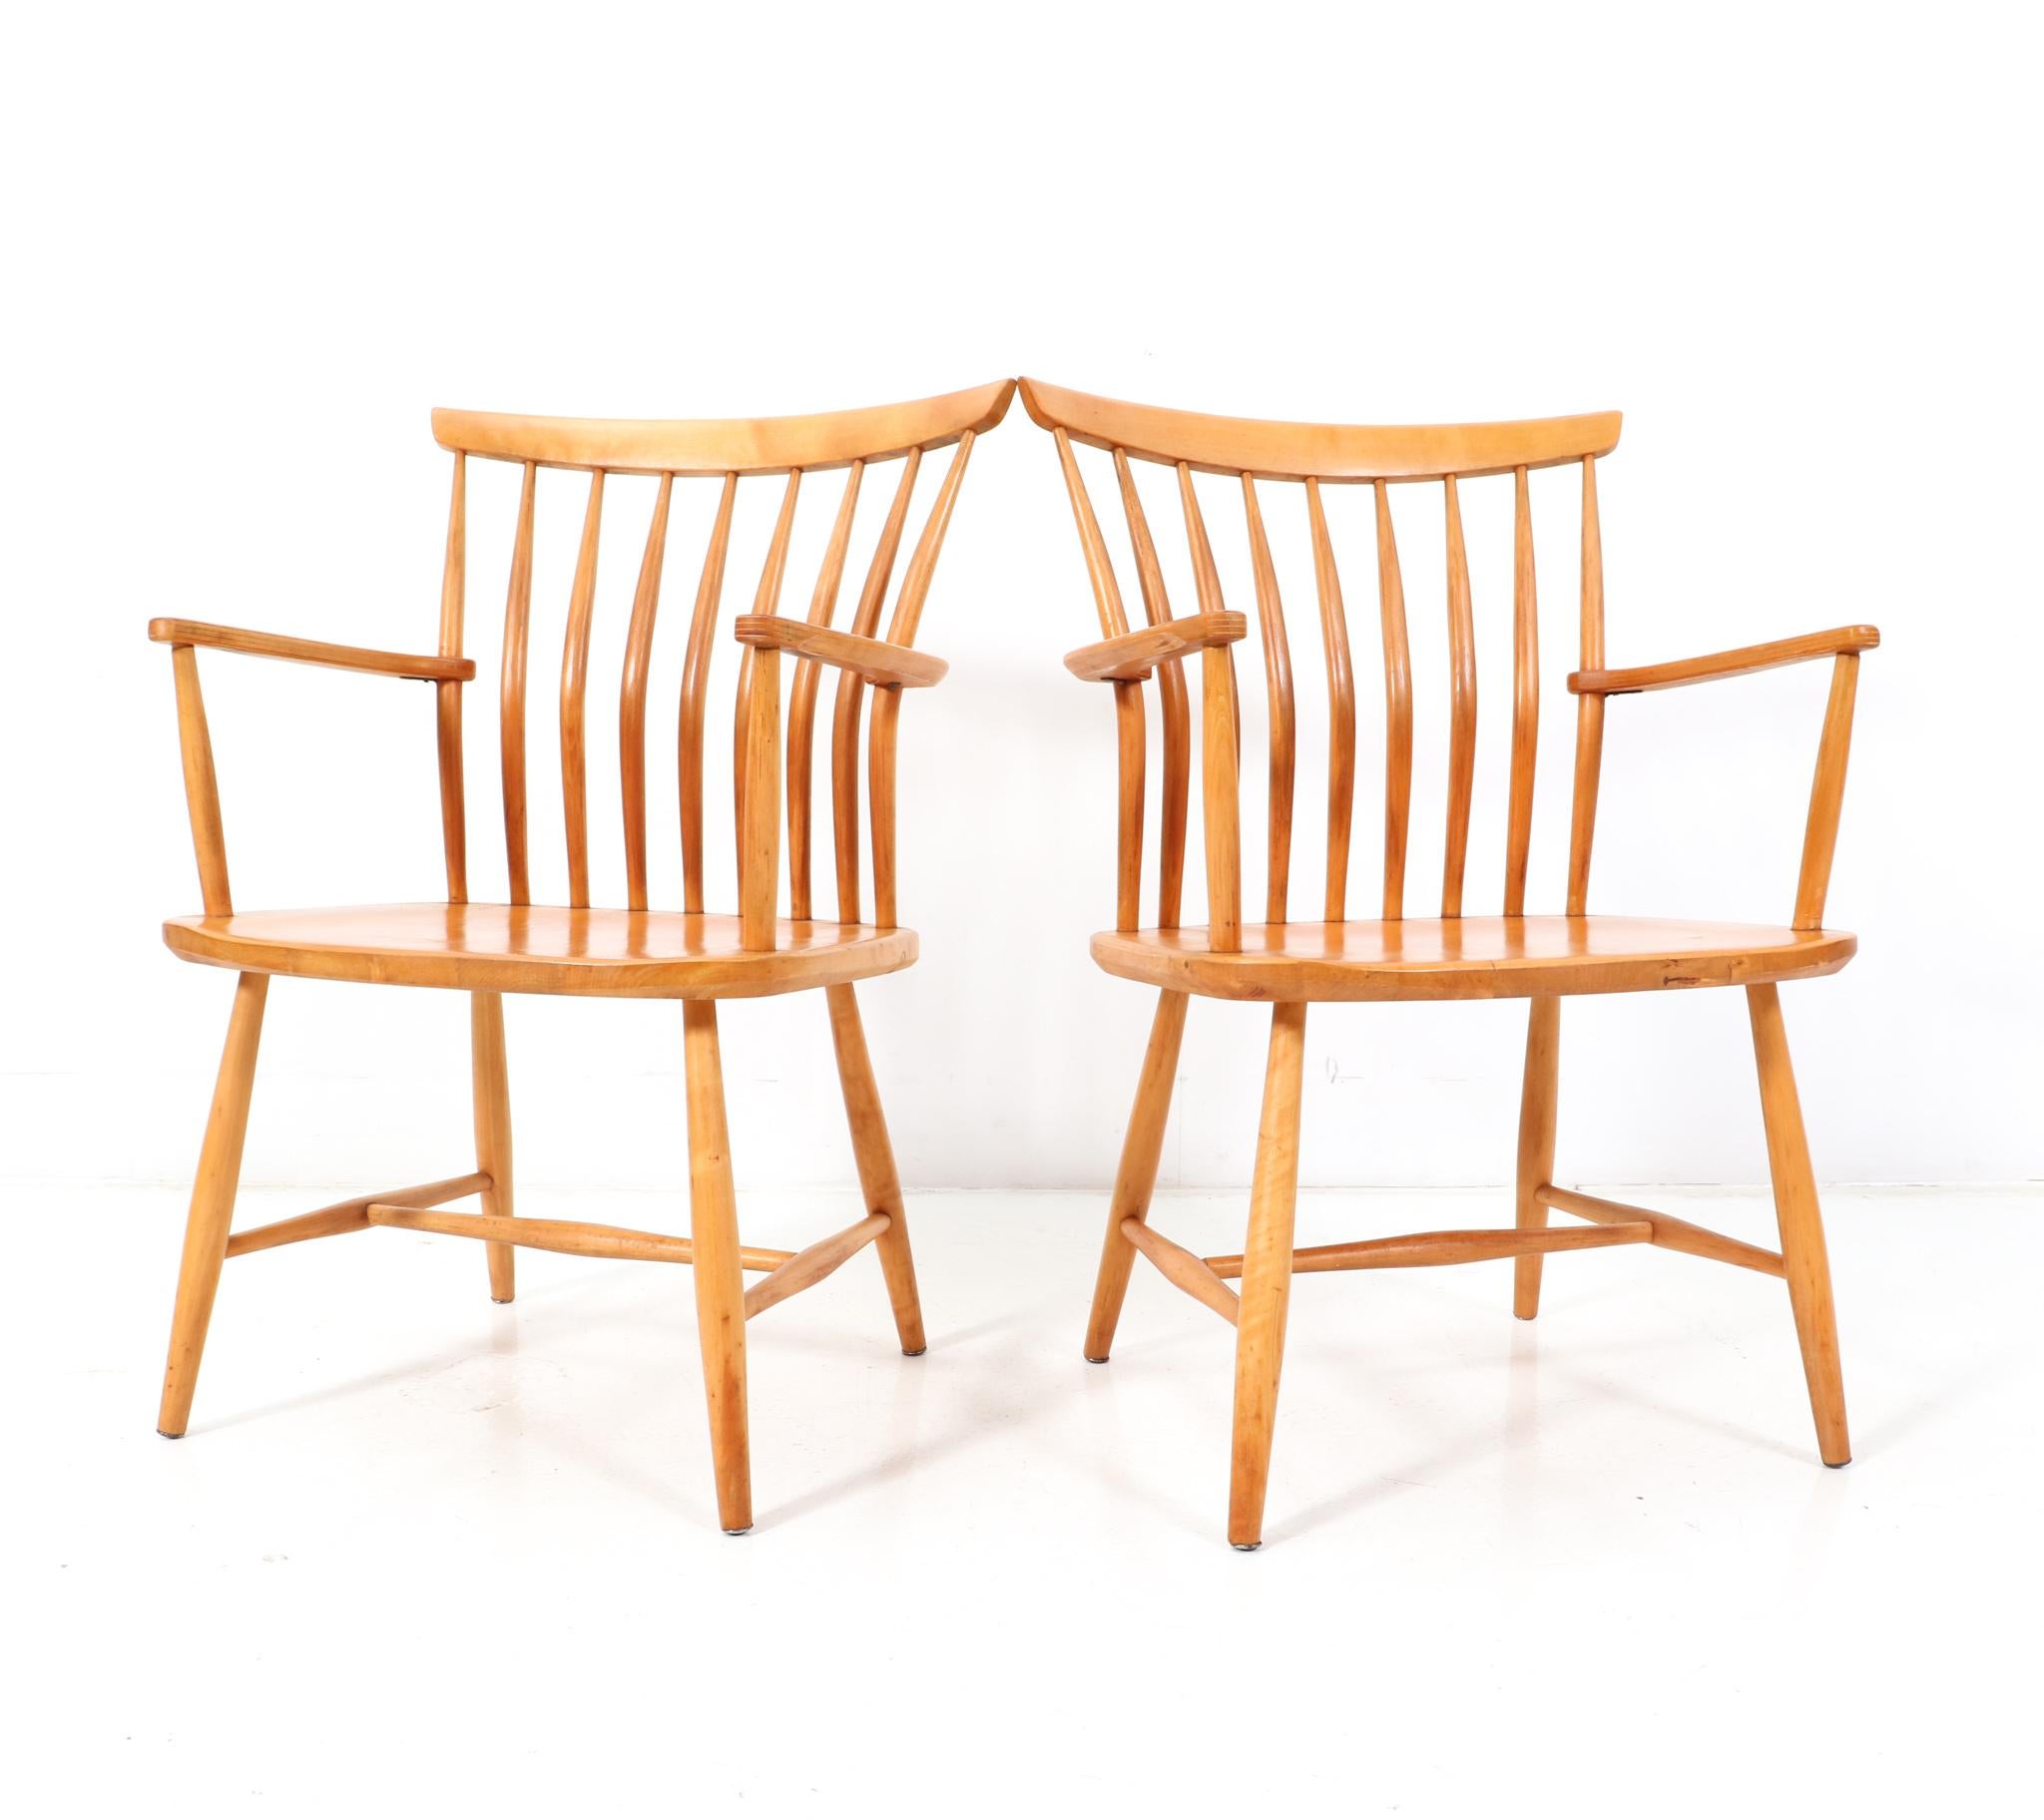 Amazing and rare pair of Mid-Century Modern armchairs.
Design by Bengt Akerblom and Gunnar Eklöf for Akerblom.
Striking Swedish design from the 1950s.
Solid birch frames and both armchairs are marked with the original manufacturers label.
This